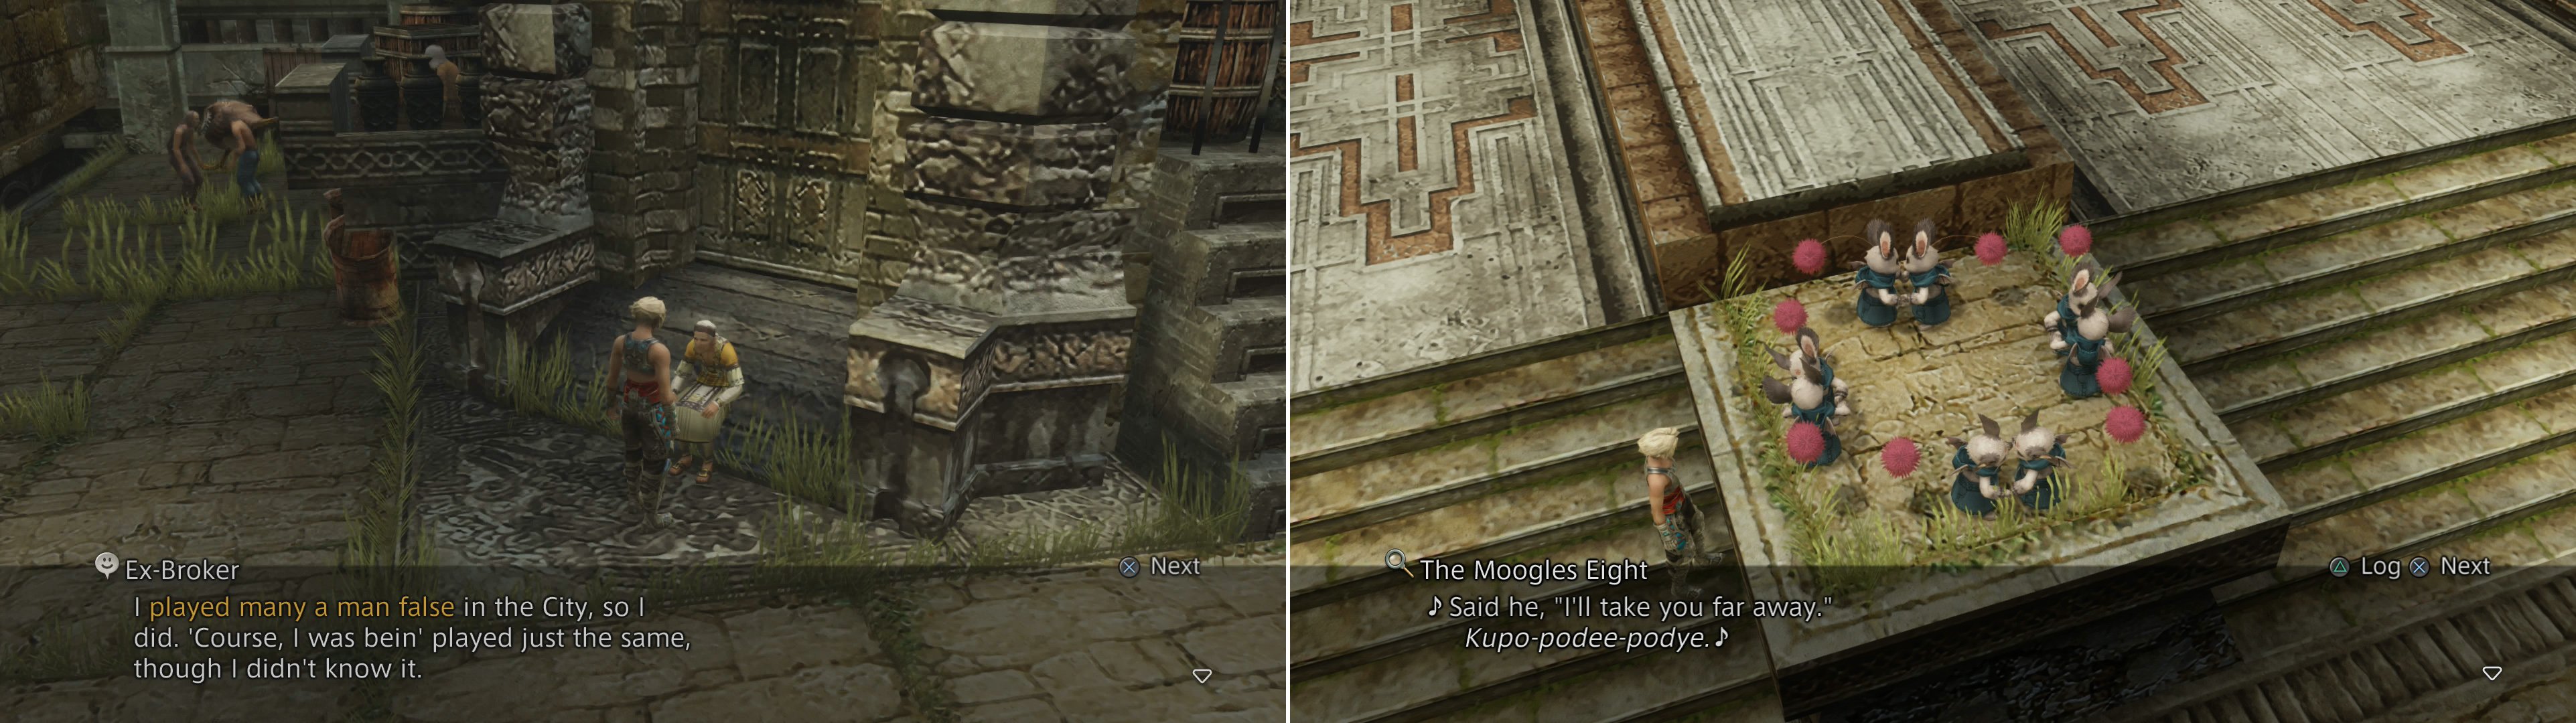 Various characters in Old Archades will reveal important information (left), which others, like these dancing Moogles, are apparent recipients of such information (right).